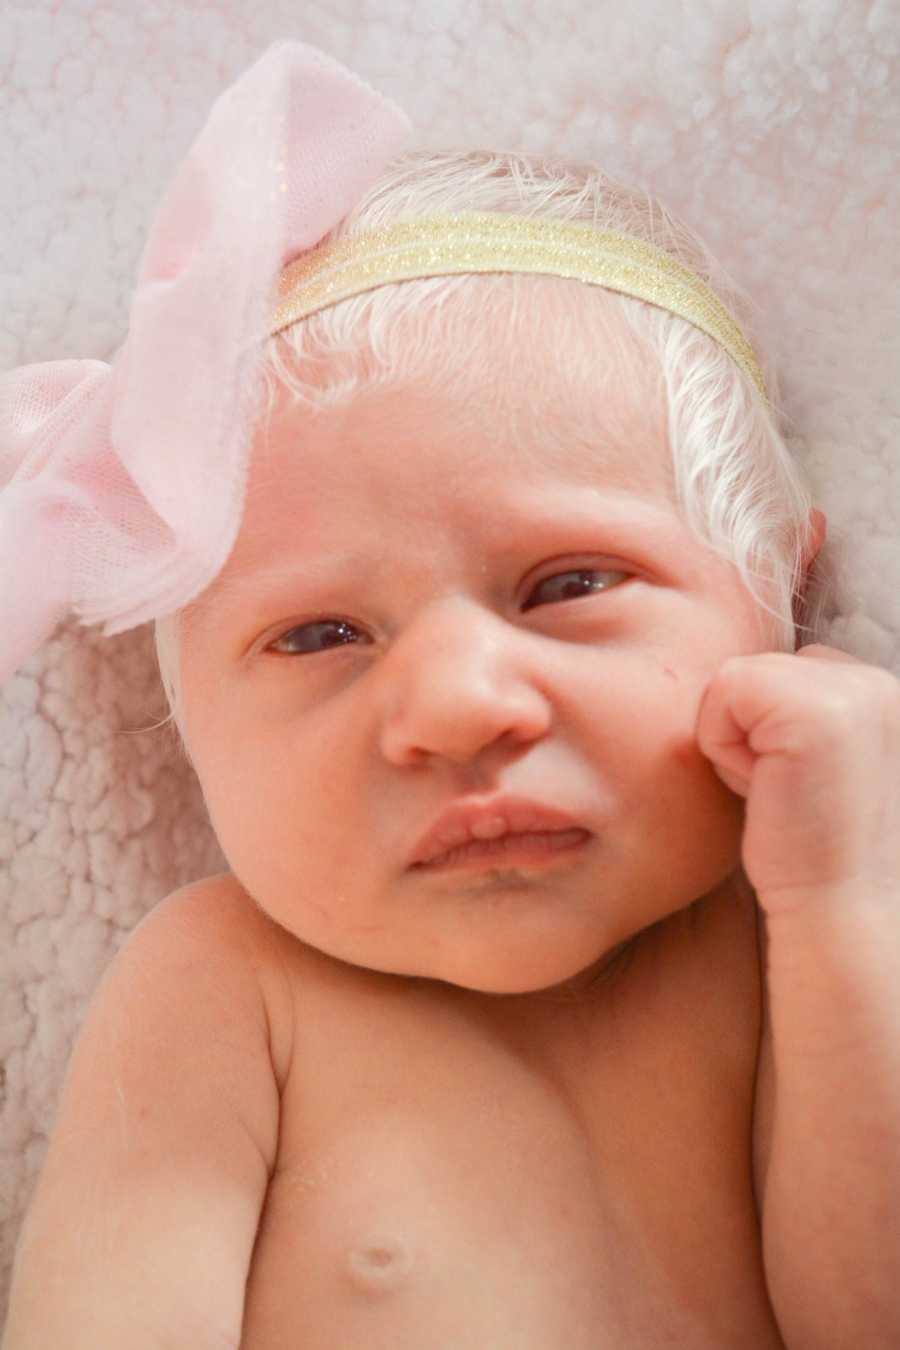 Close up of albino baby with bright white hair wearing headband with pink bow